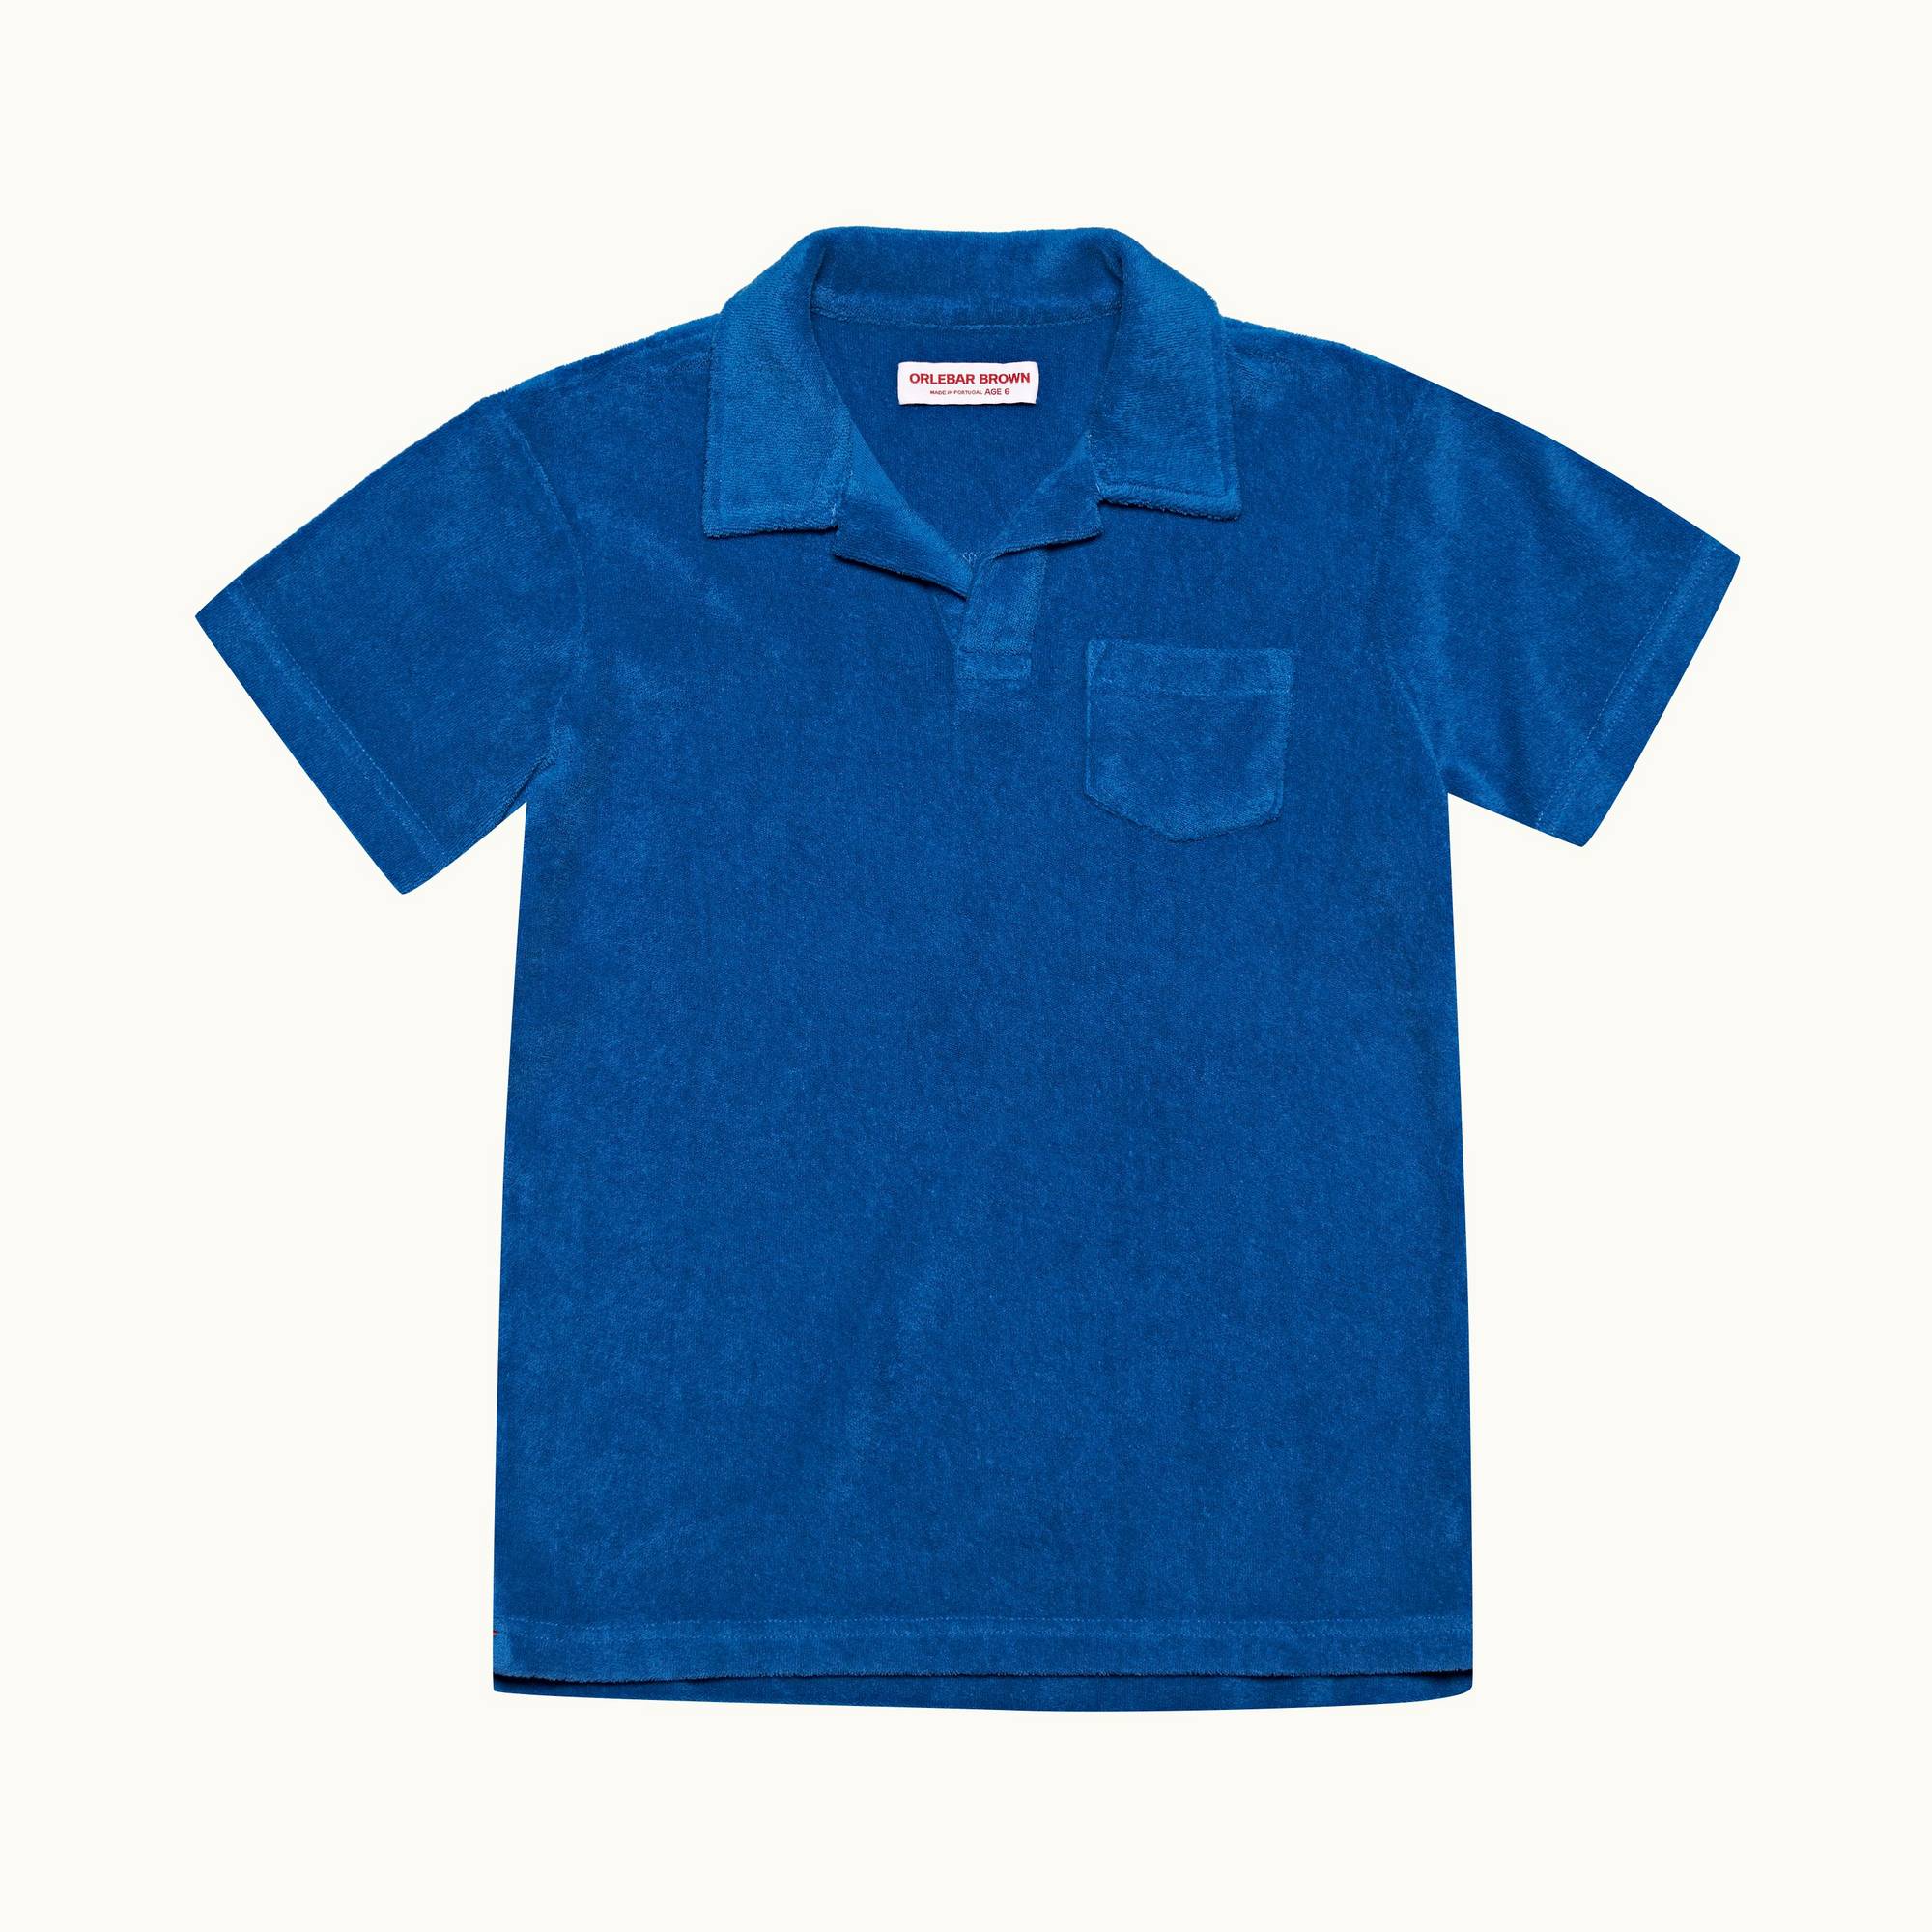 Digby Towelling - Childrens Kids' Signal Blue Organic Towelling Resort Polo Shirt